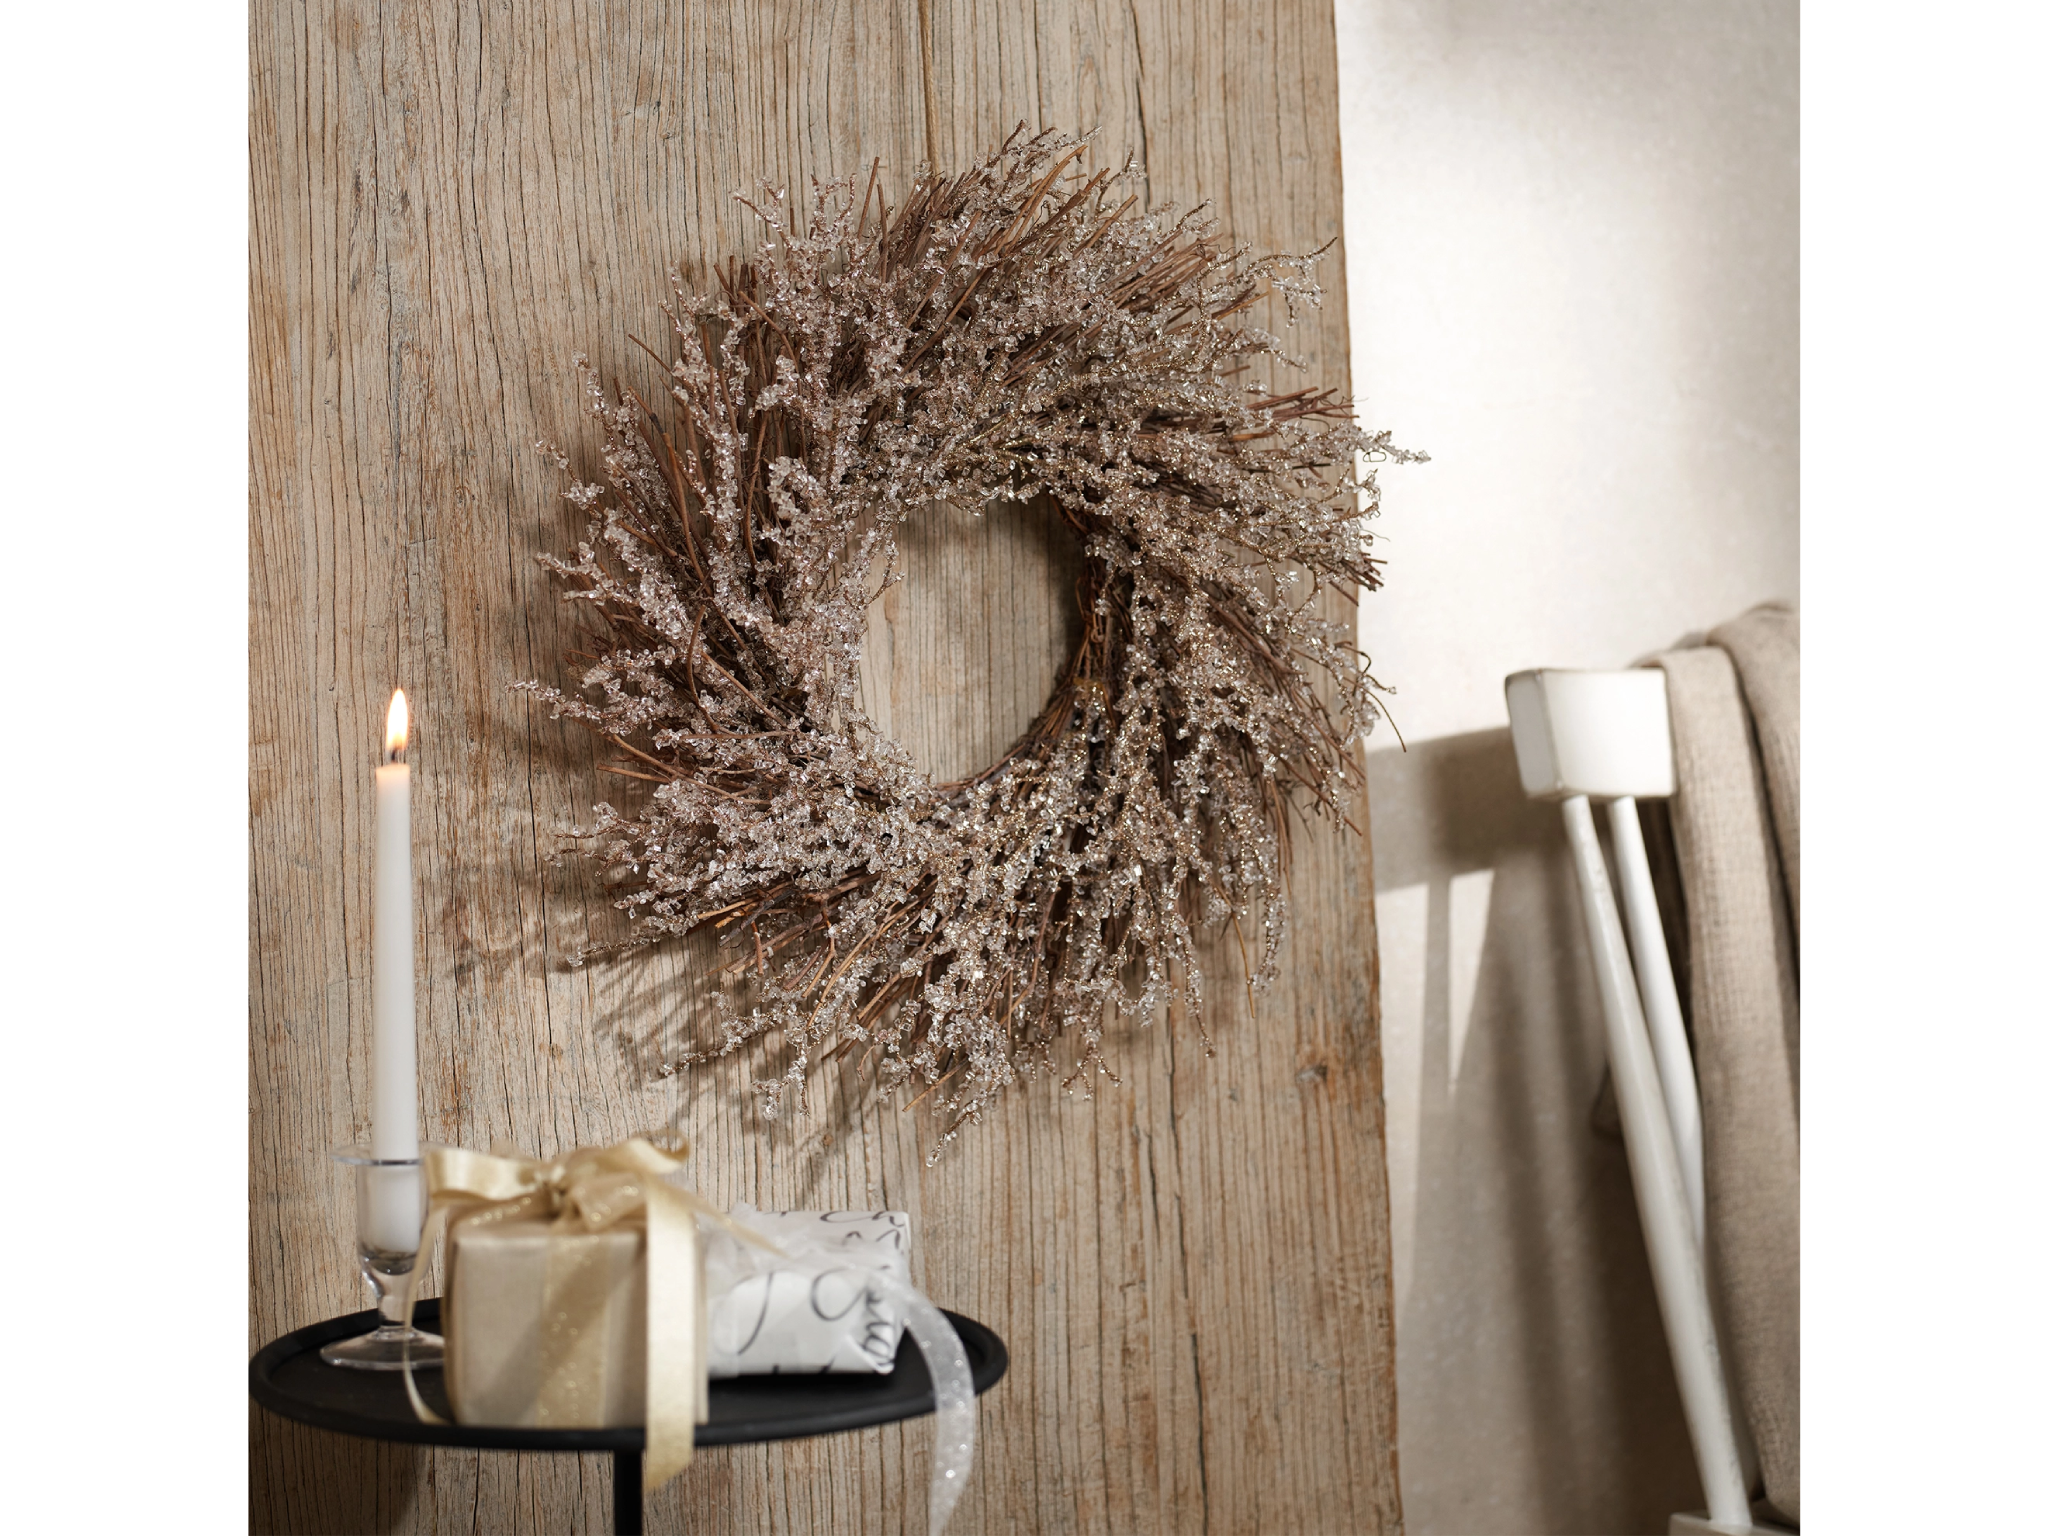 the white company, indybest, deals, black friday, amazon, black friday, the white company cyber monday sale is here – and there’s 20% off everything